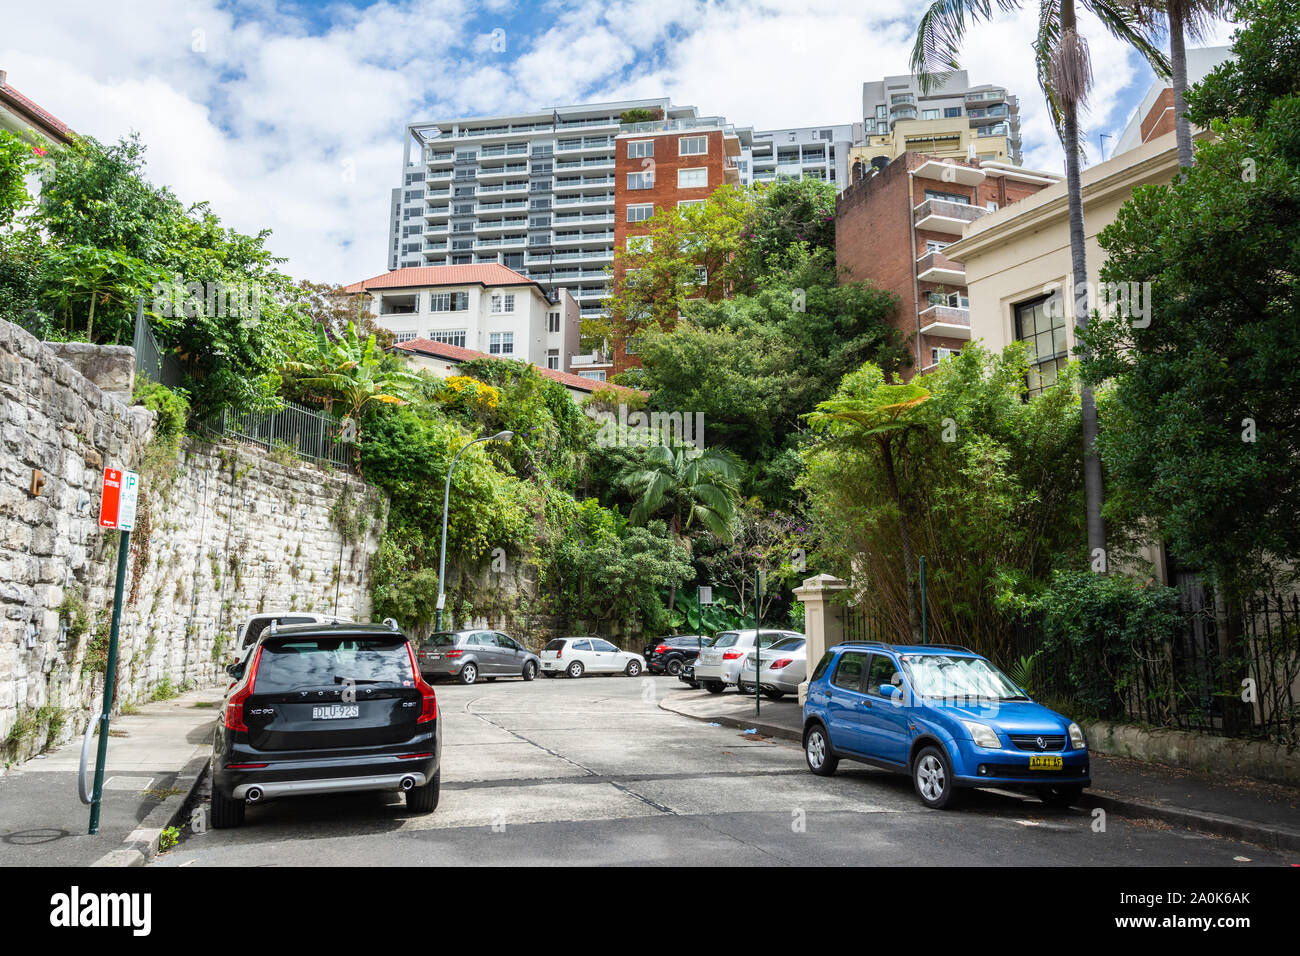 Sydney, Australia - March 10, 2017. Street view in Potts Point neighbourhood of Sydney, with cars, buildings and vegetation. Stock Photo